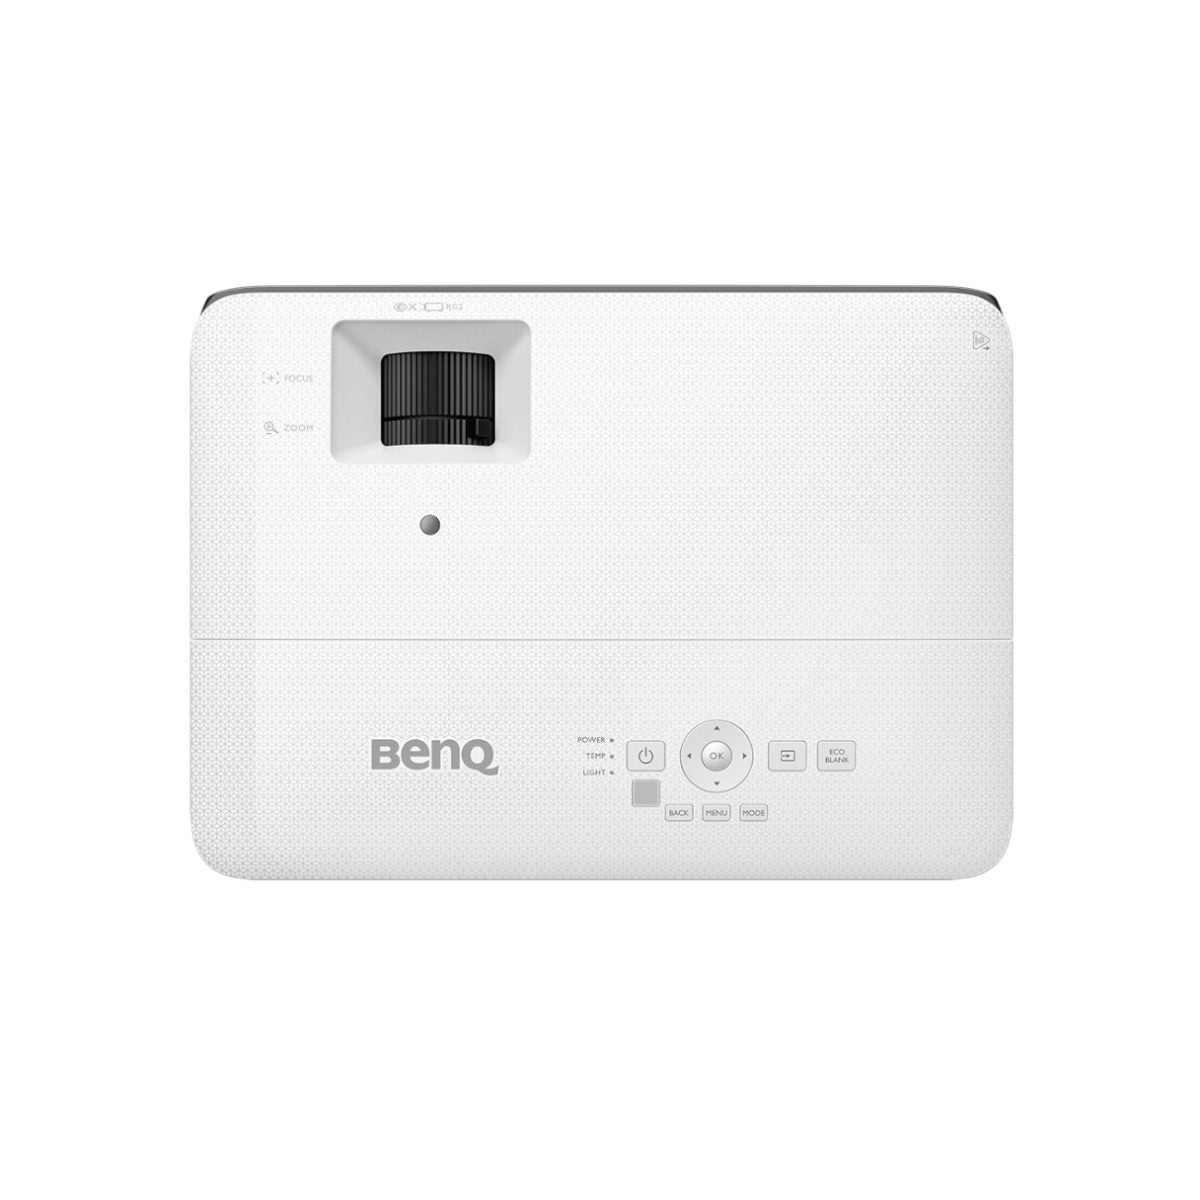 BenQ TK700 4K HDR Gaming Projector - Top View